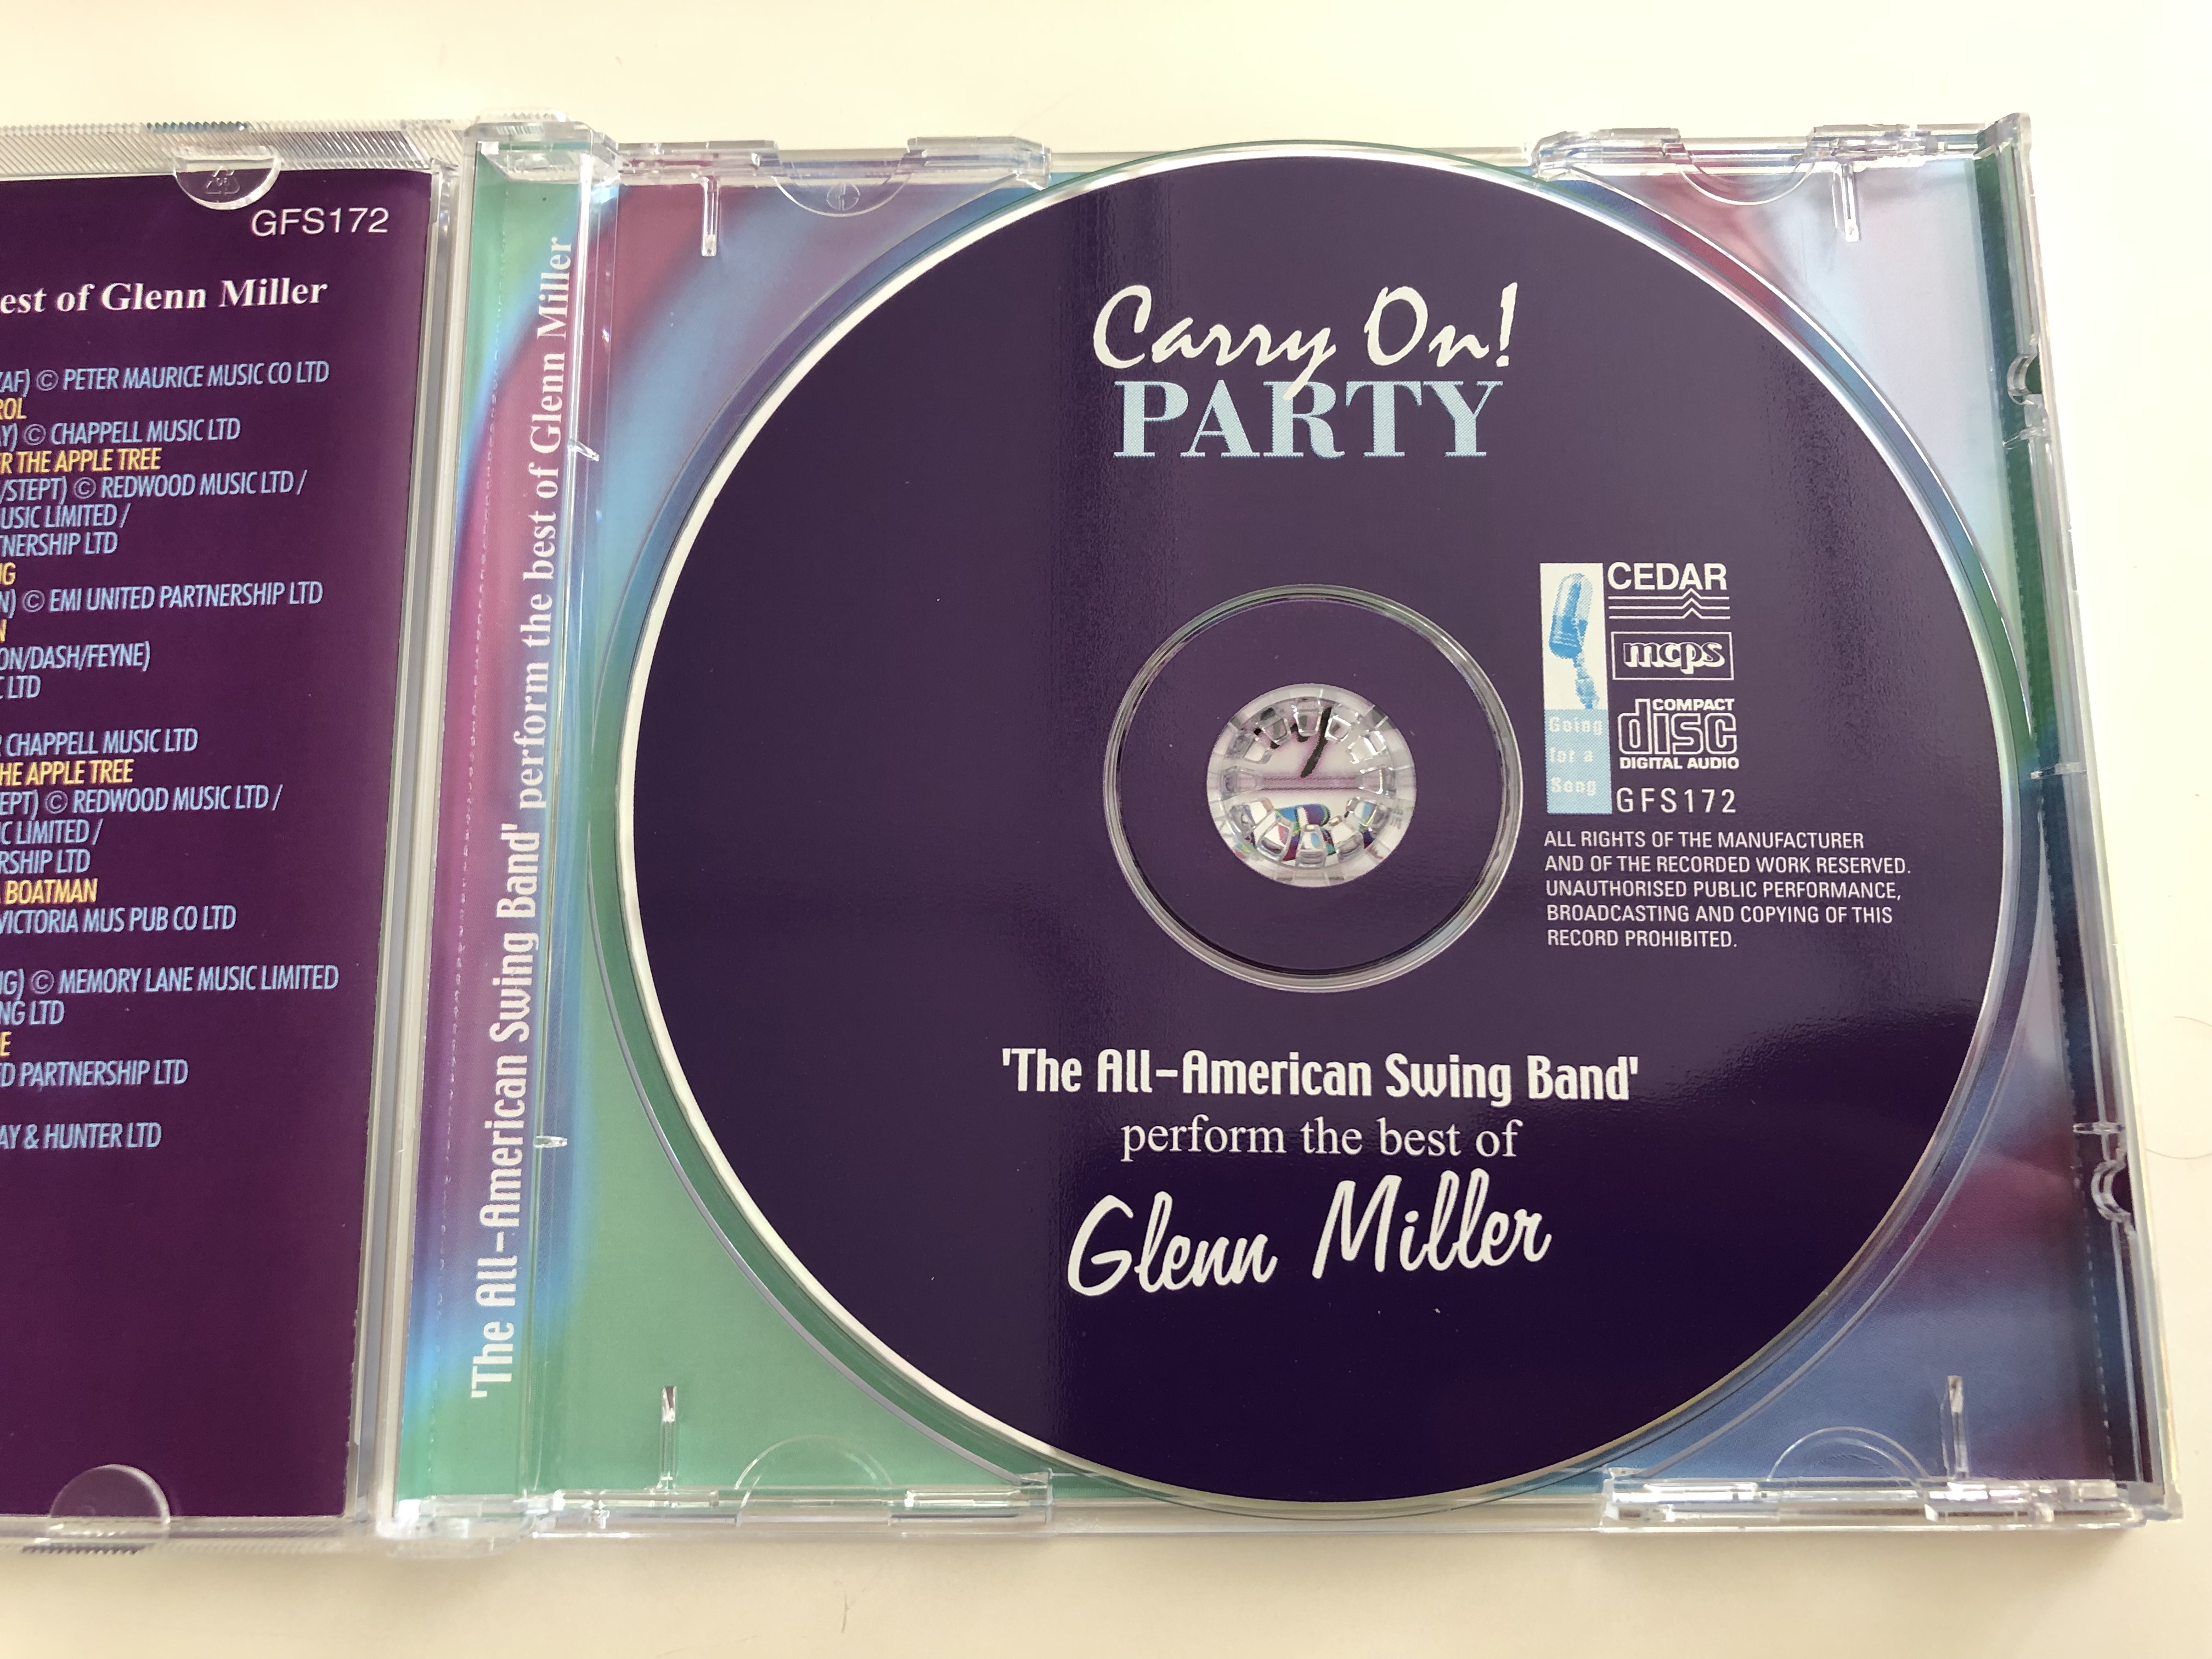 the-all-american-swing-band-performs-the-best-of-glenn-miller-carry-on-party-audio-cd-gfs172-3-.jpg